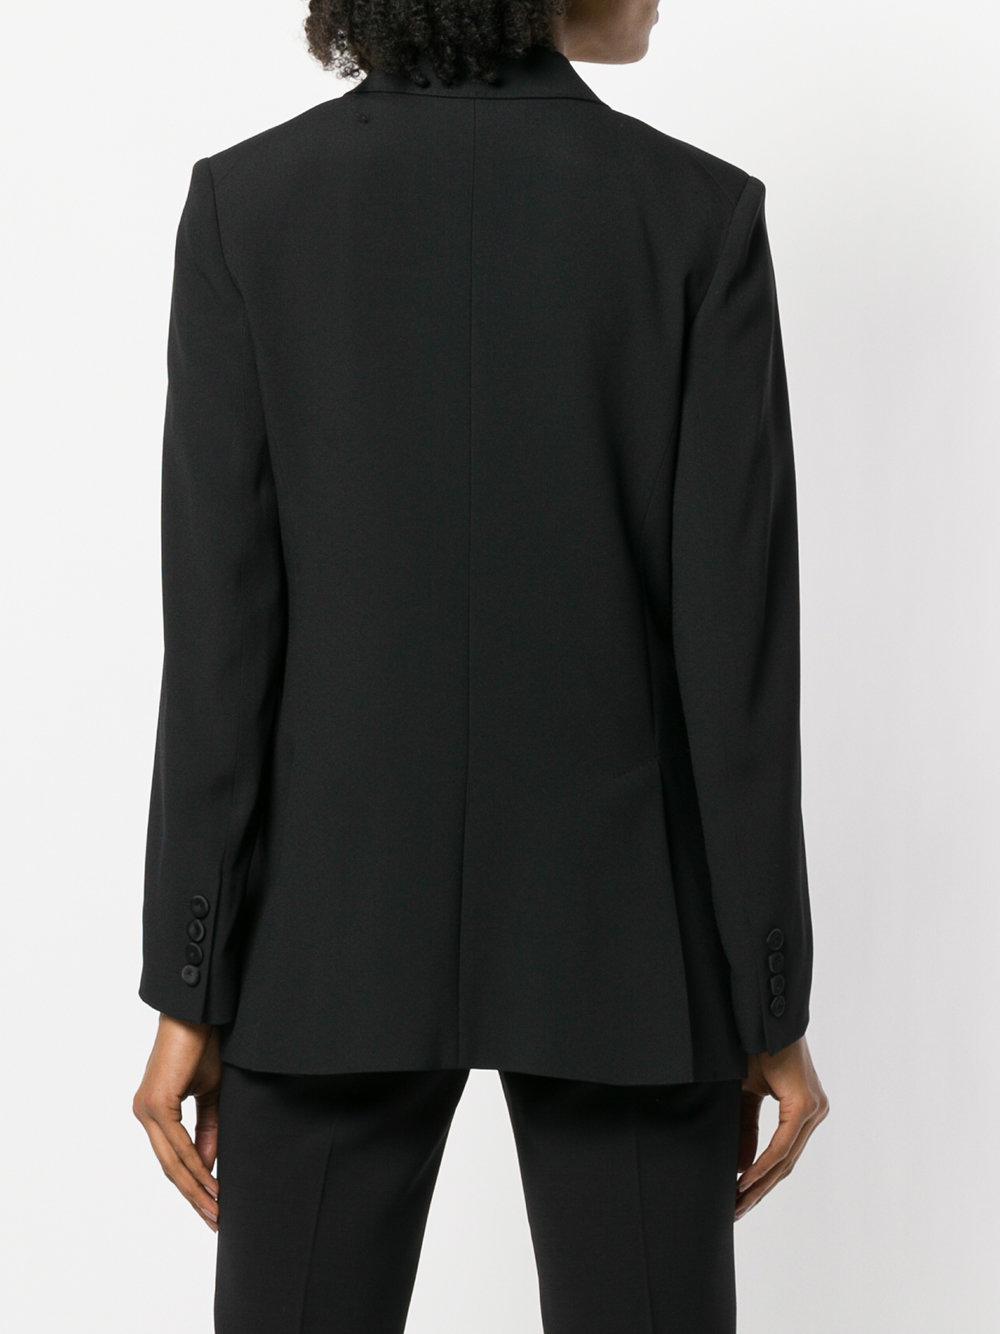 Max Mara Silk Double Breasted Dinner Jacket in Black - Lyst